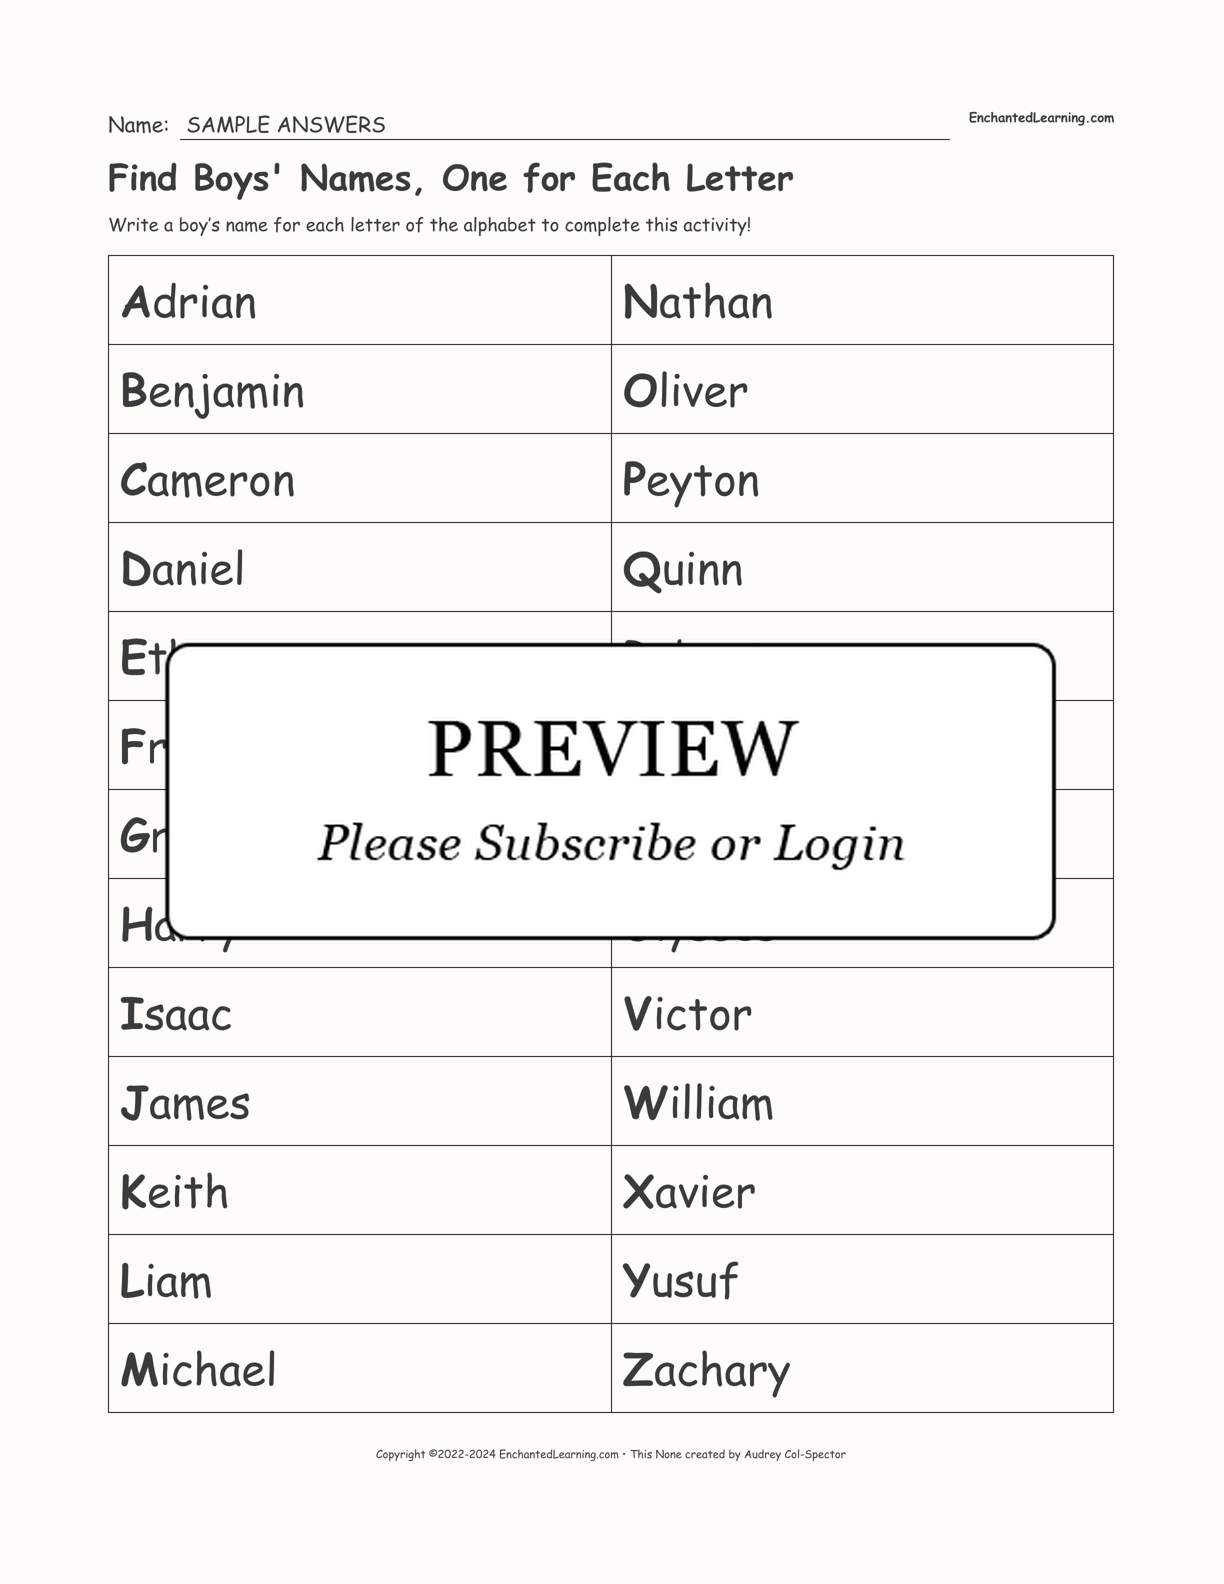 Find Boys' Names, One for Each Letter interactive worksheet page 2